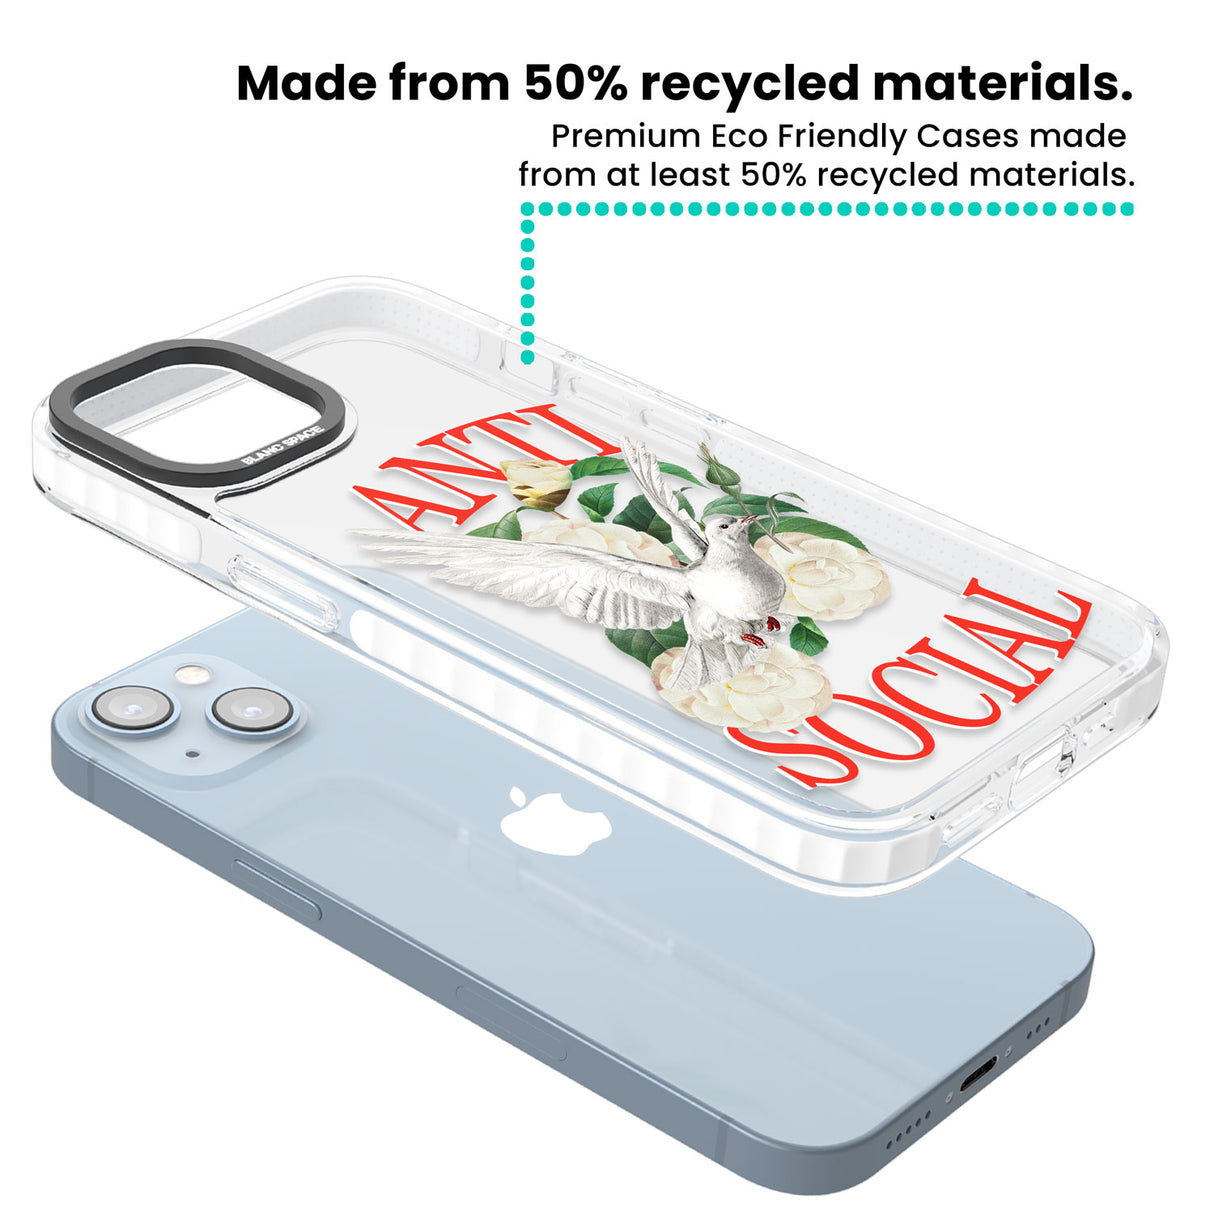 Anti-Social Clear Impact Phone Case for iPhone 13, iPhone 14, iPhone 15